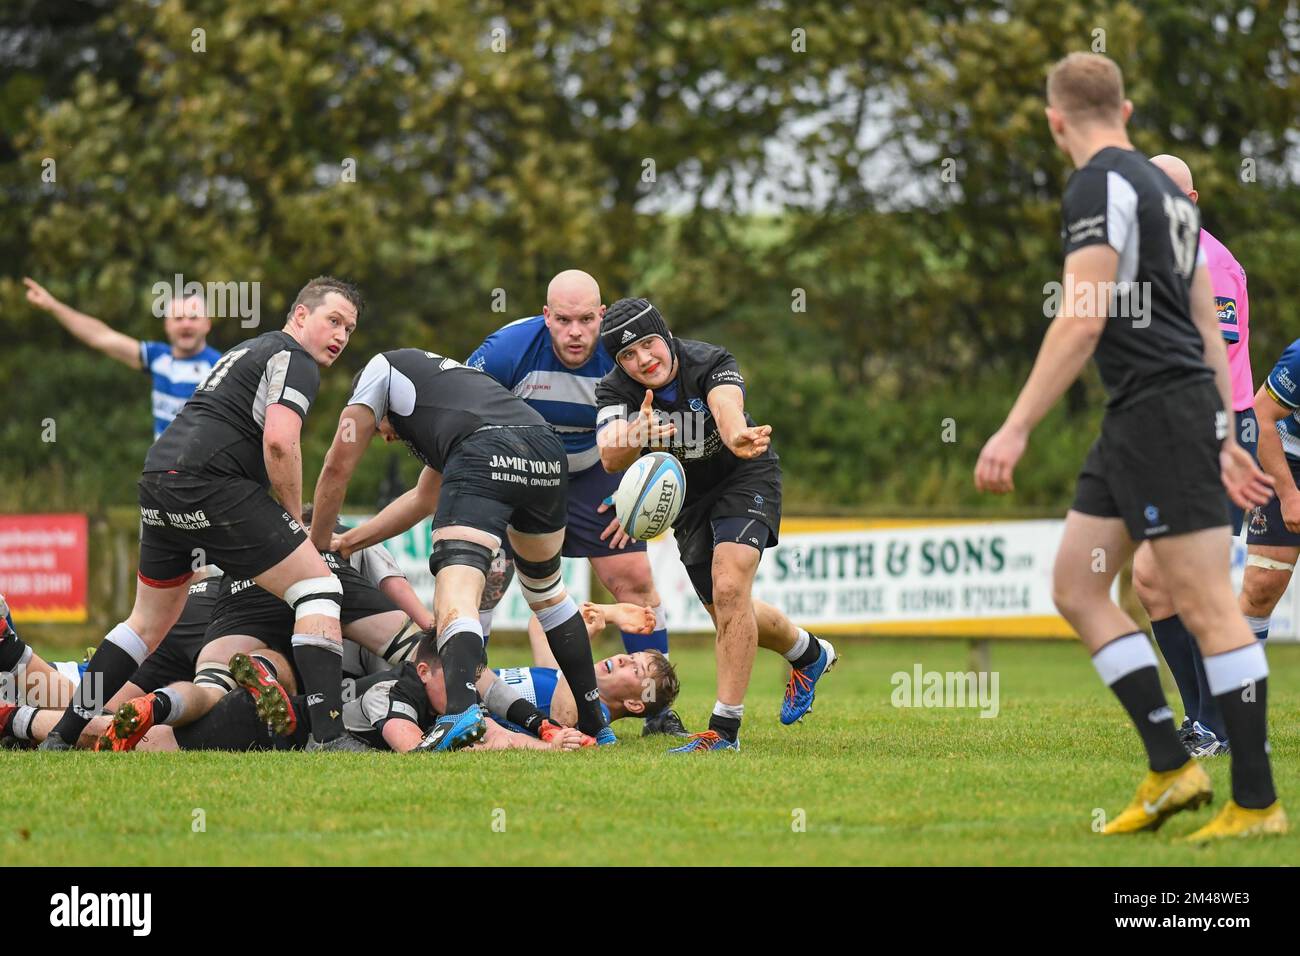 Berwick scrum half passes the ball from the rear of the scrum at the Berwick rugby club versus Howe of Fife rugby club mens match Stock Photo